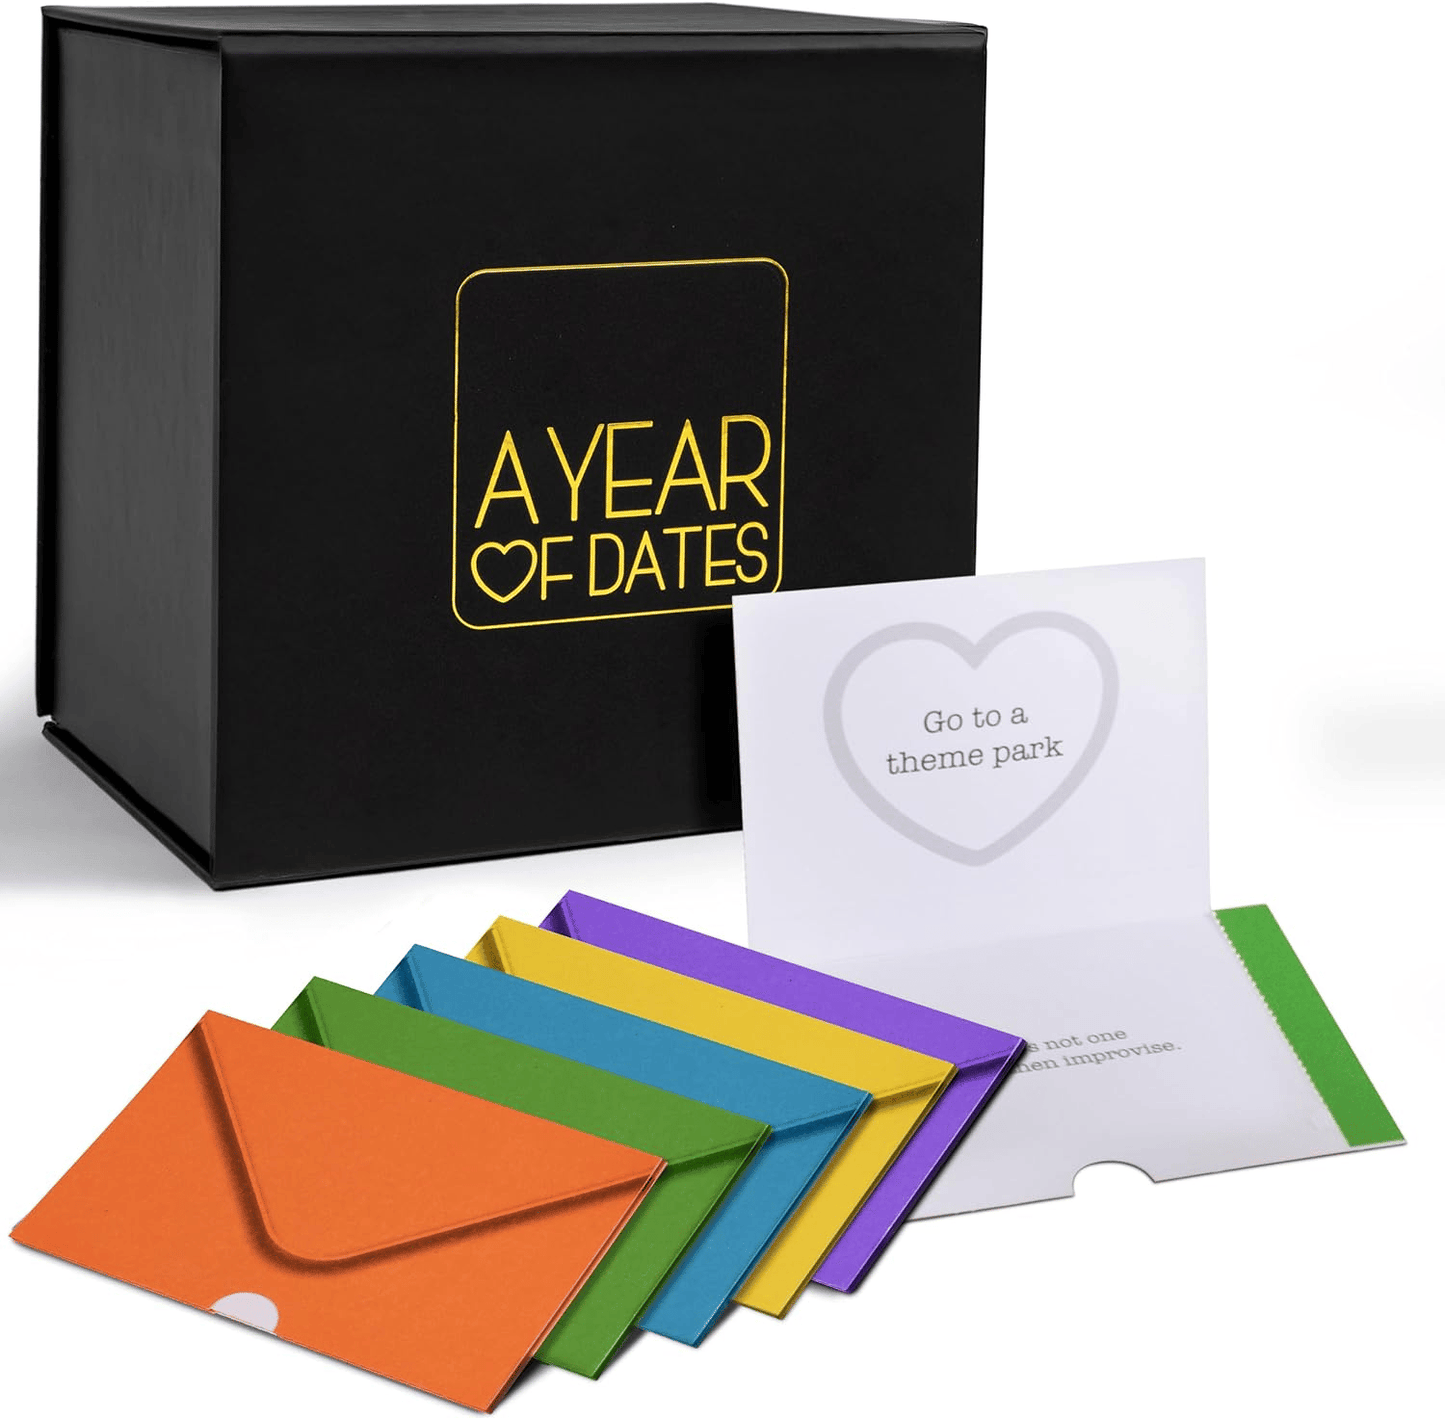 A Year Of Dates A Date Night Box with Sealed Date Ideas